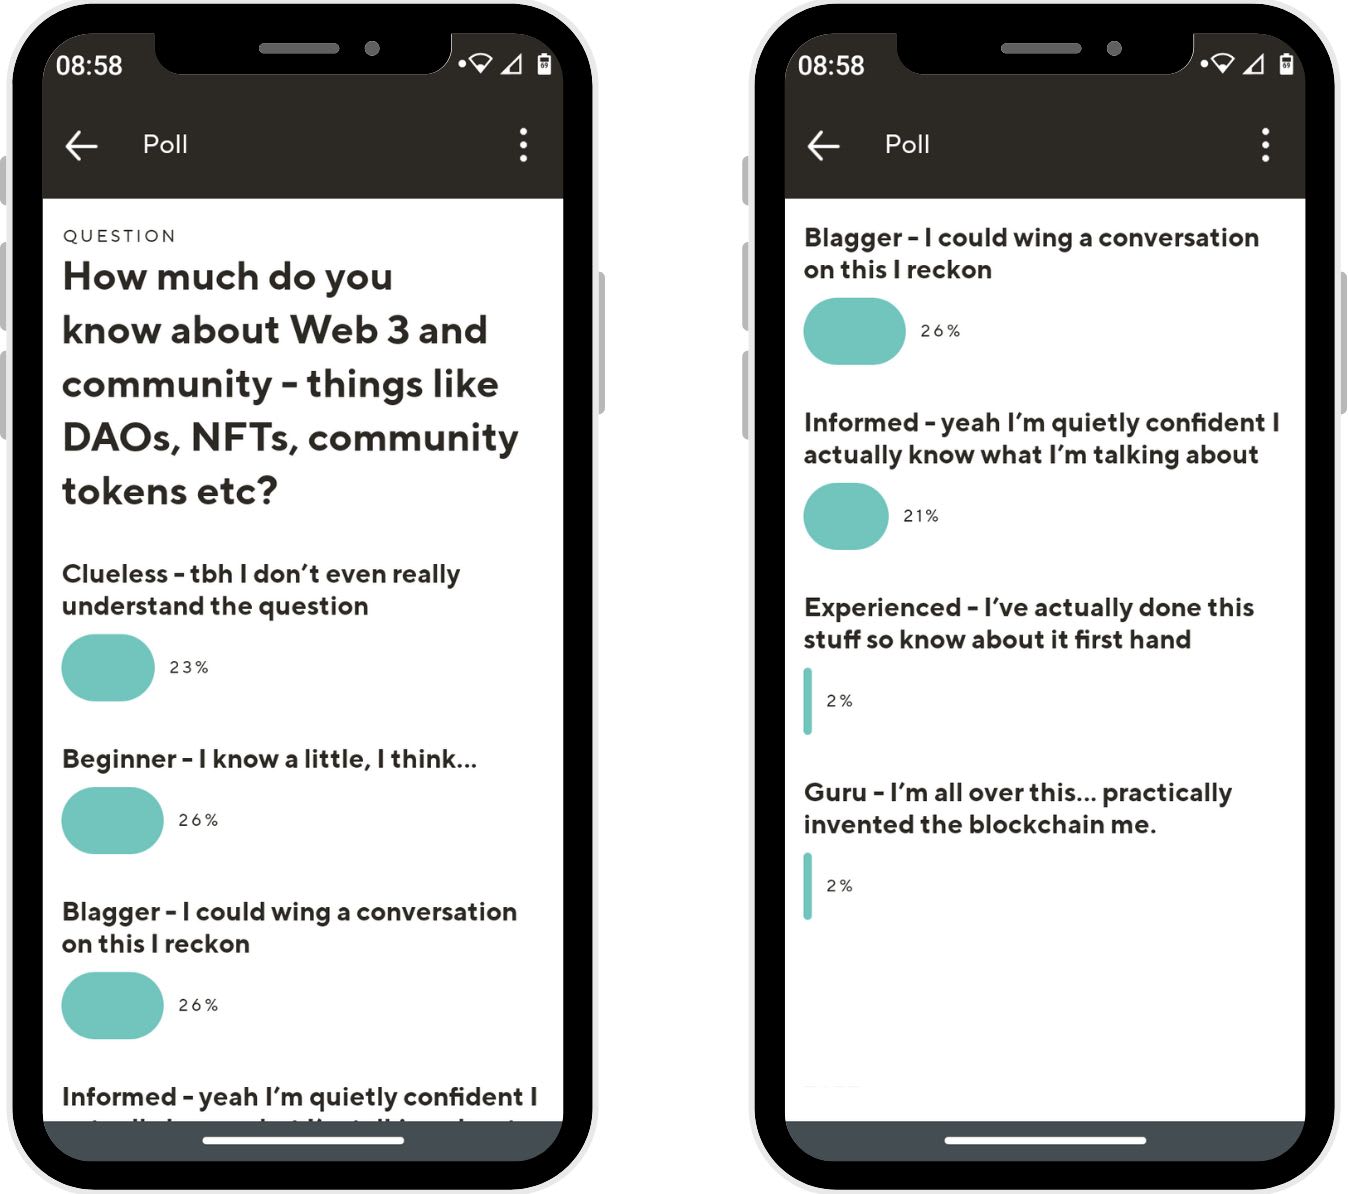 Community and events in action - using Guild's polling feature to survey the event attendees' topic knowledge ahead of a speaker presentation on Web 3